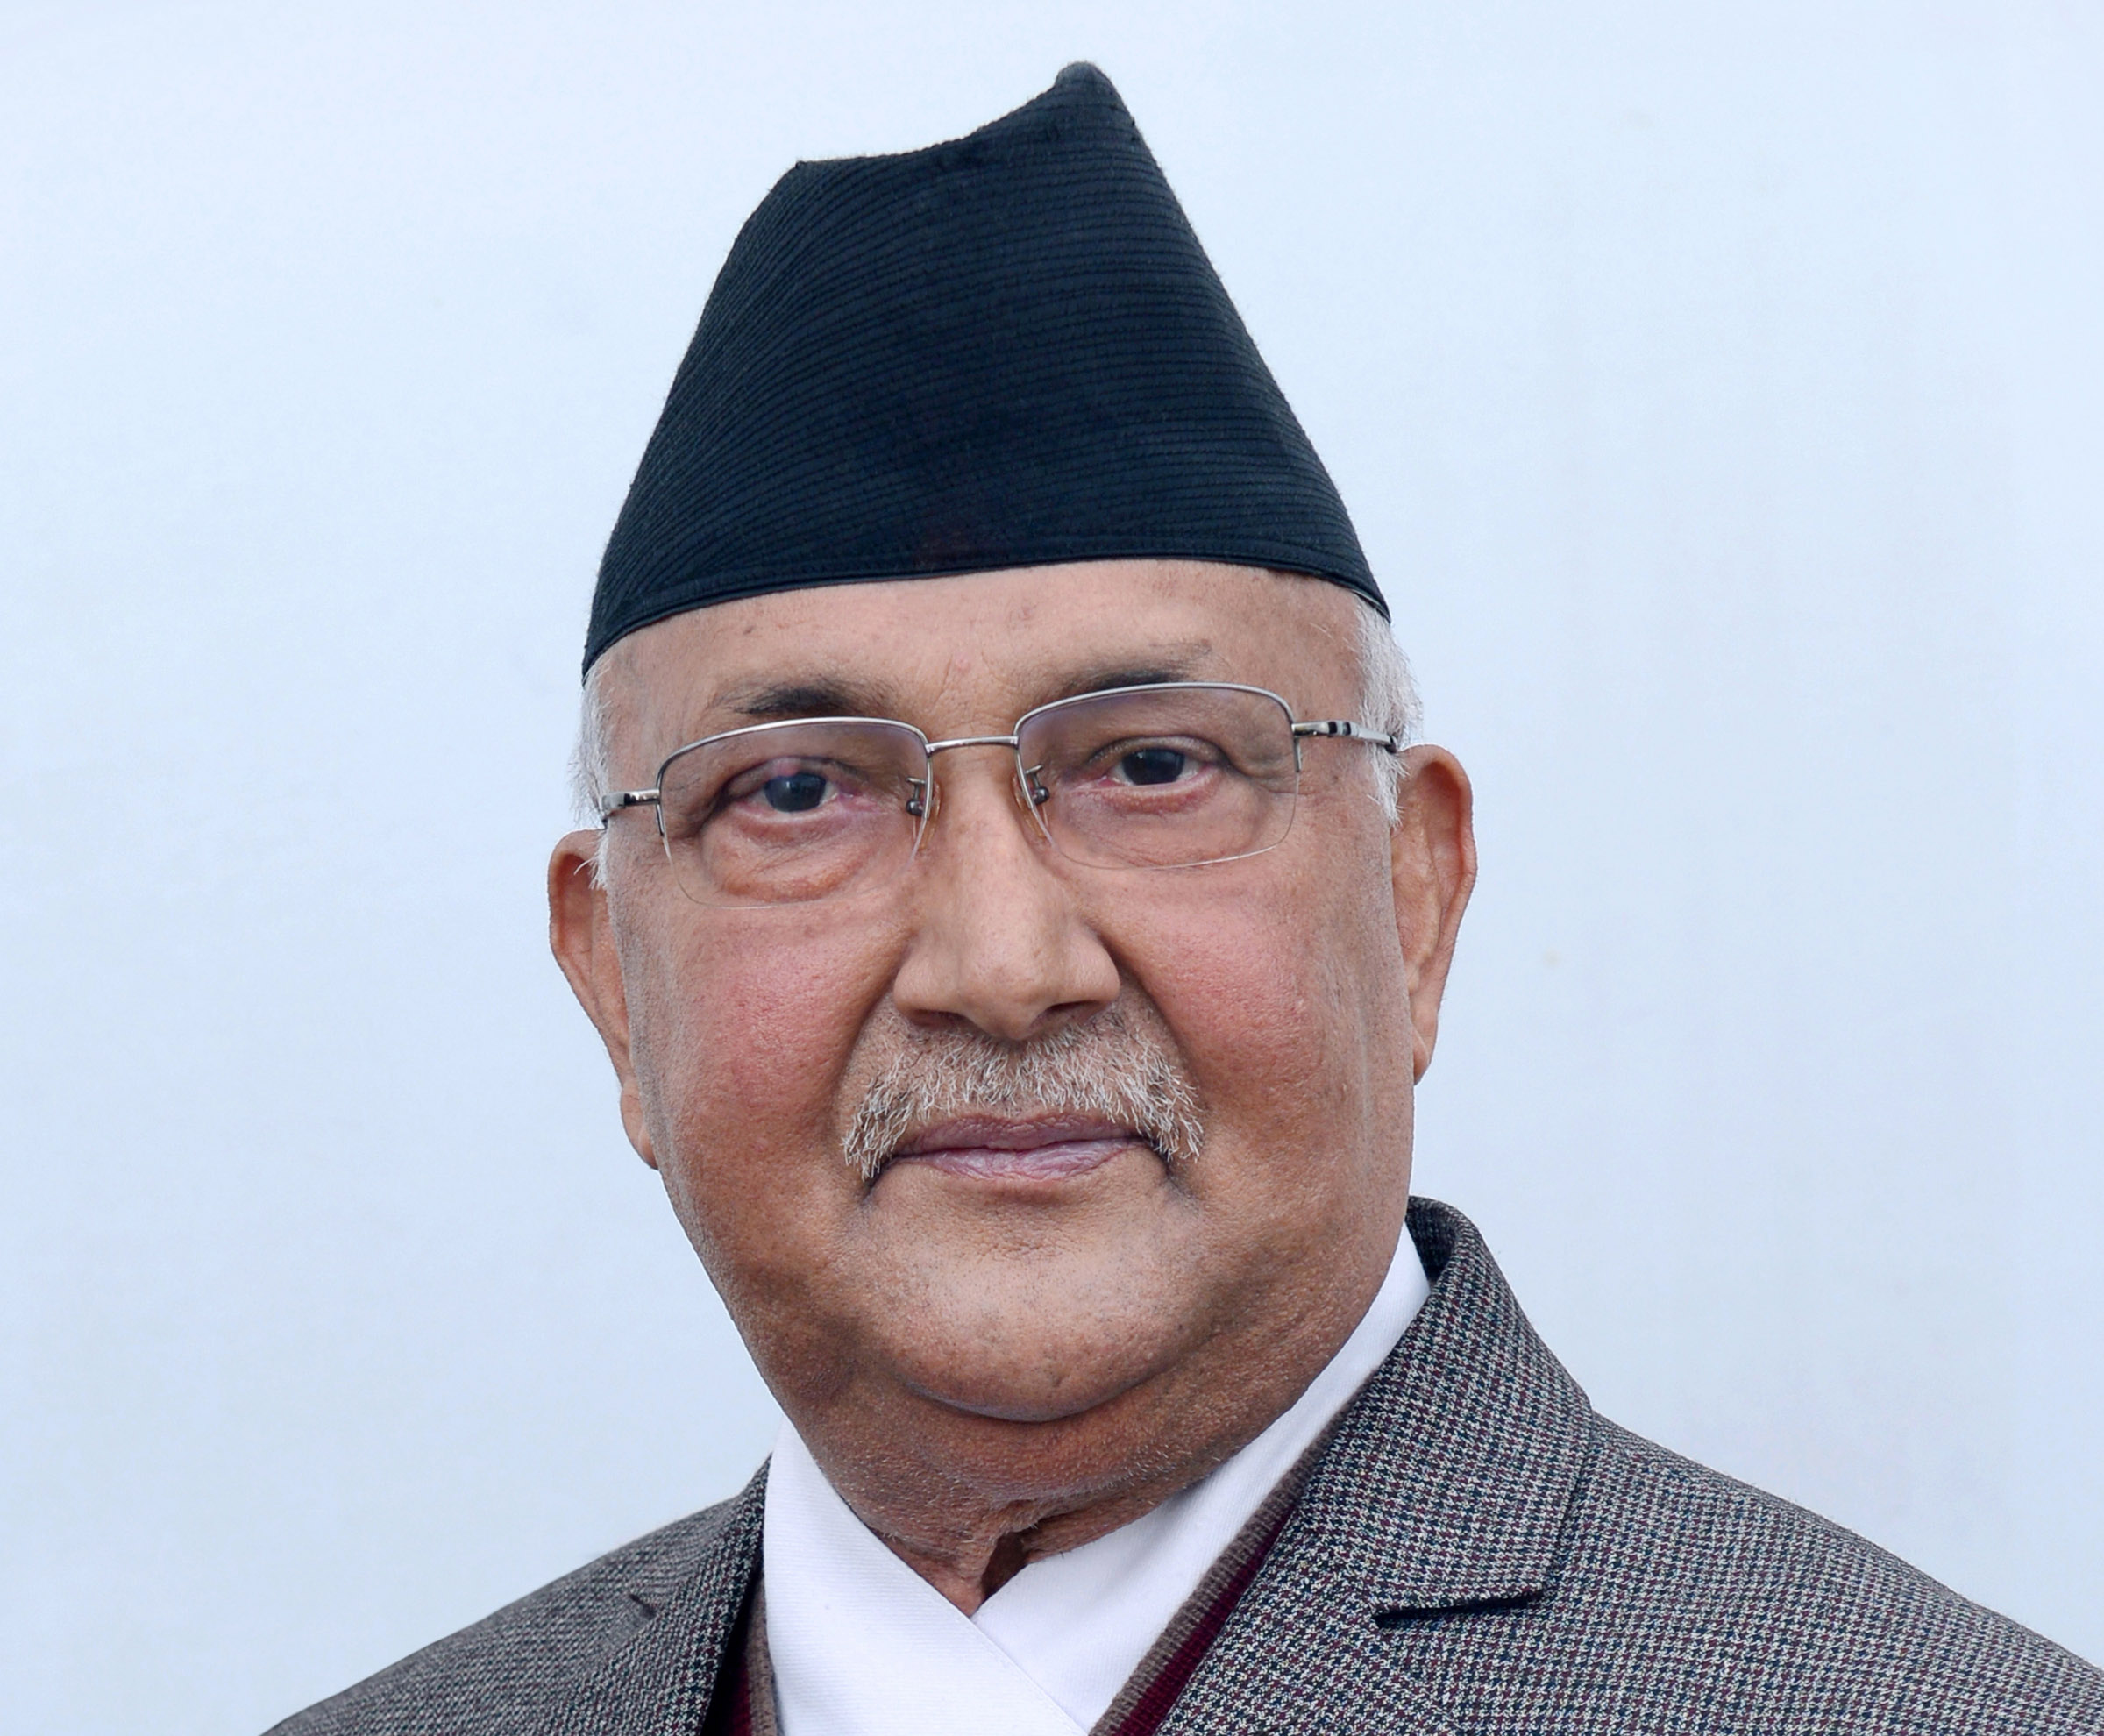 Prime Minister Oli makes wrong claim about citizenship - South Asia Check